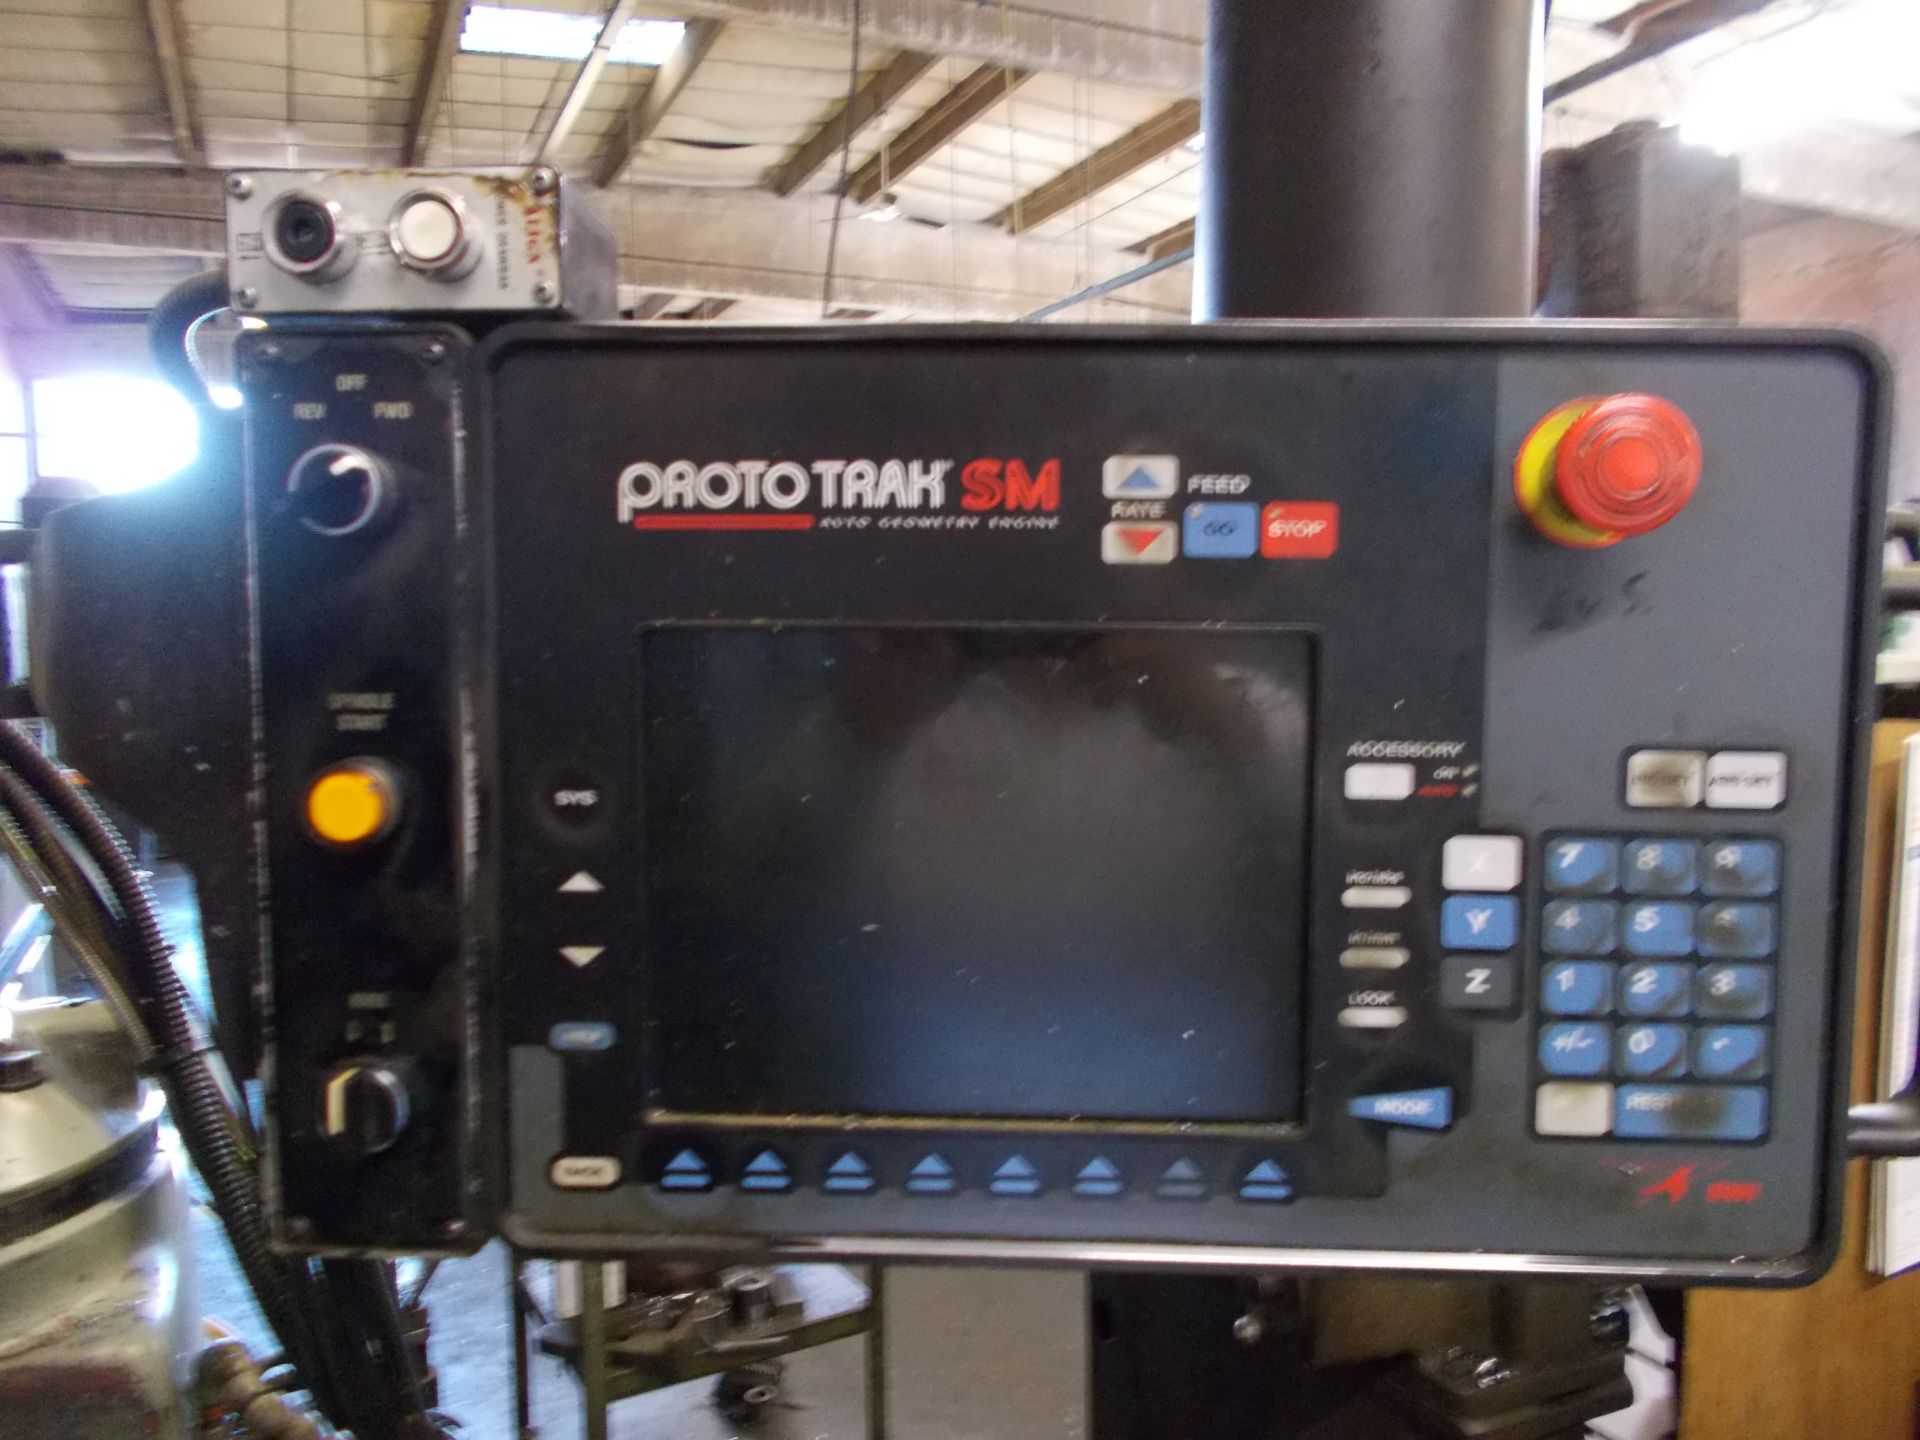 KRV 3000 CNC turret mill (Serial Number: 9820, Year: 2002), with ProtoTrak SM control, with quantity - Image 6 of 7